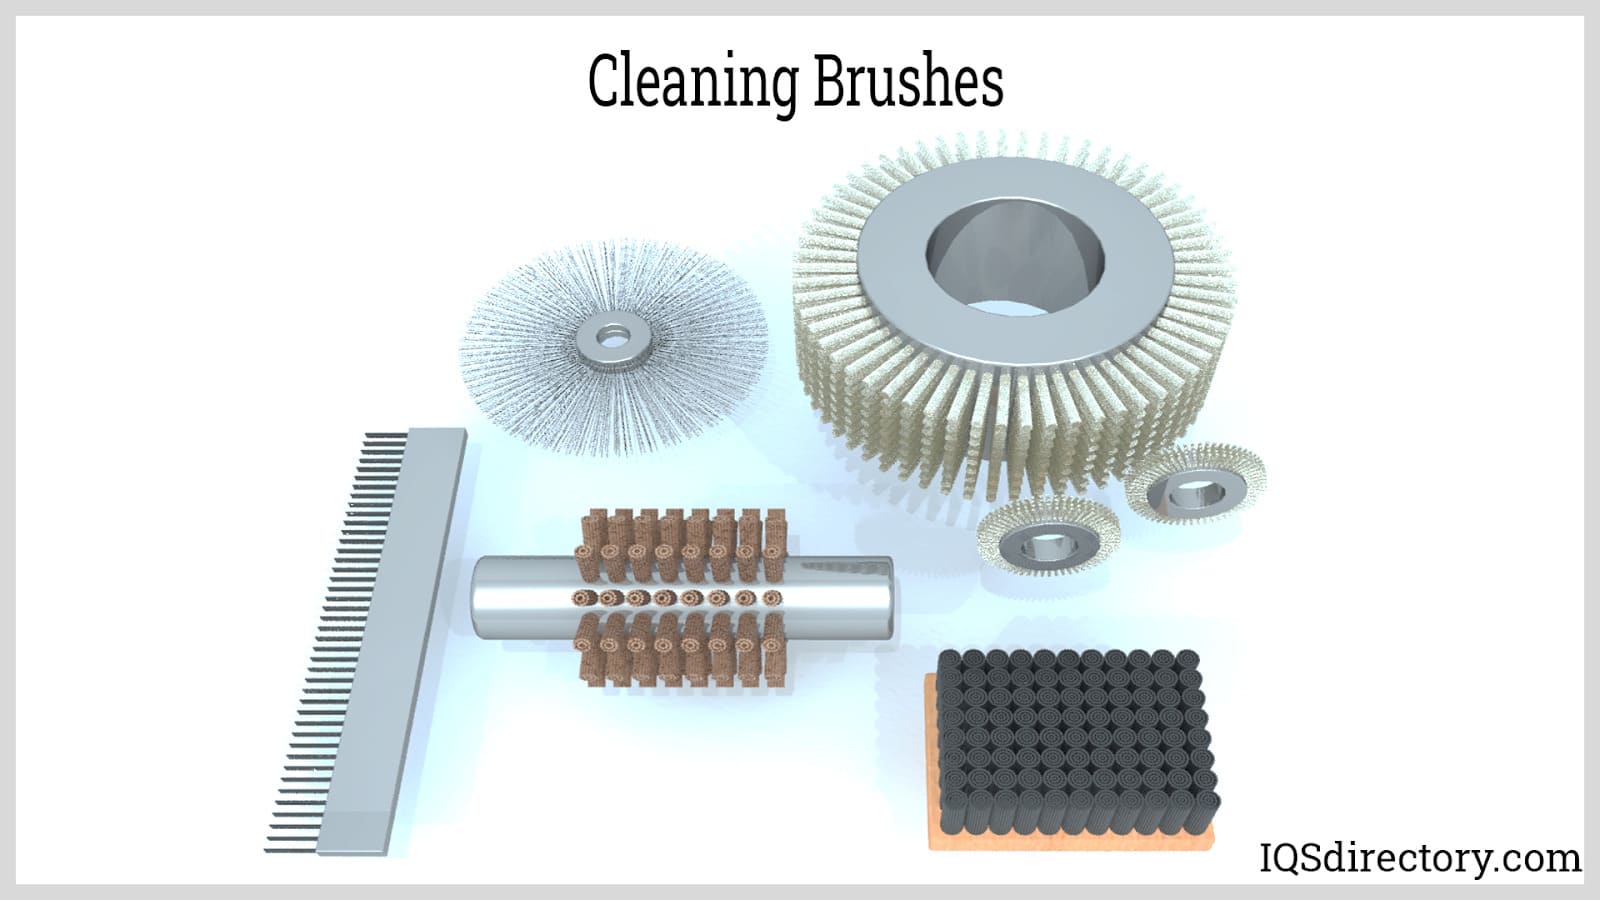 Industrial Brushes Manufacturer & Supplier - Power Brushes